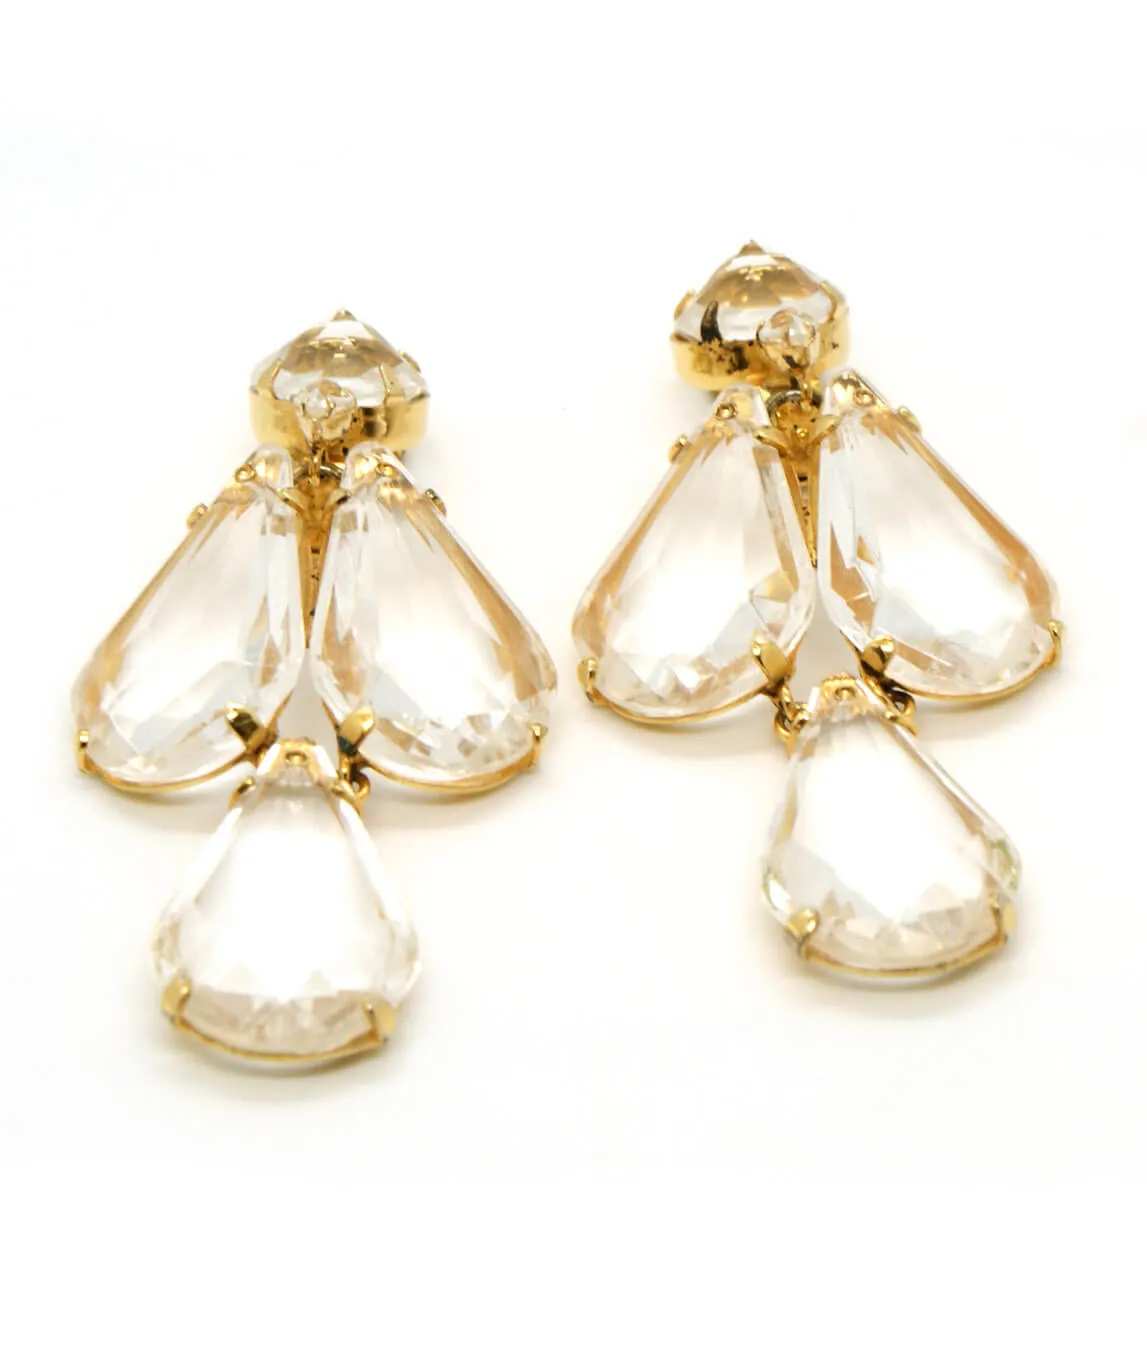 Schreiner gold and clear drop earrings